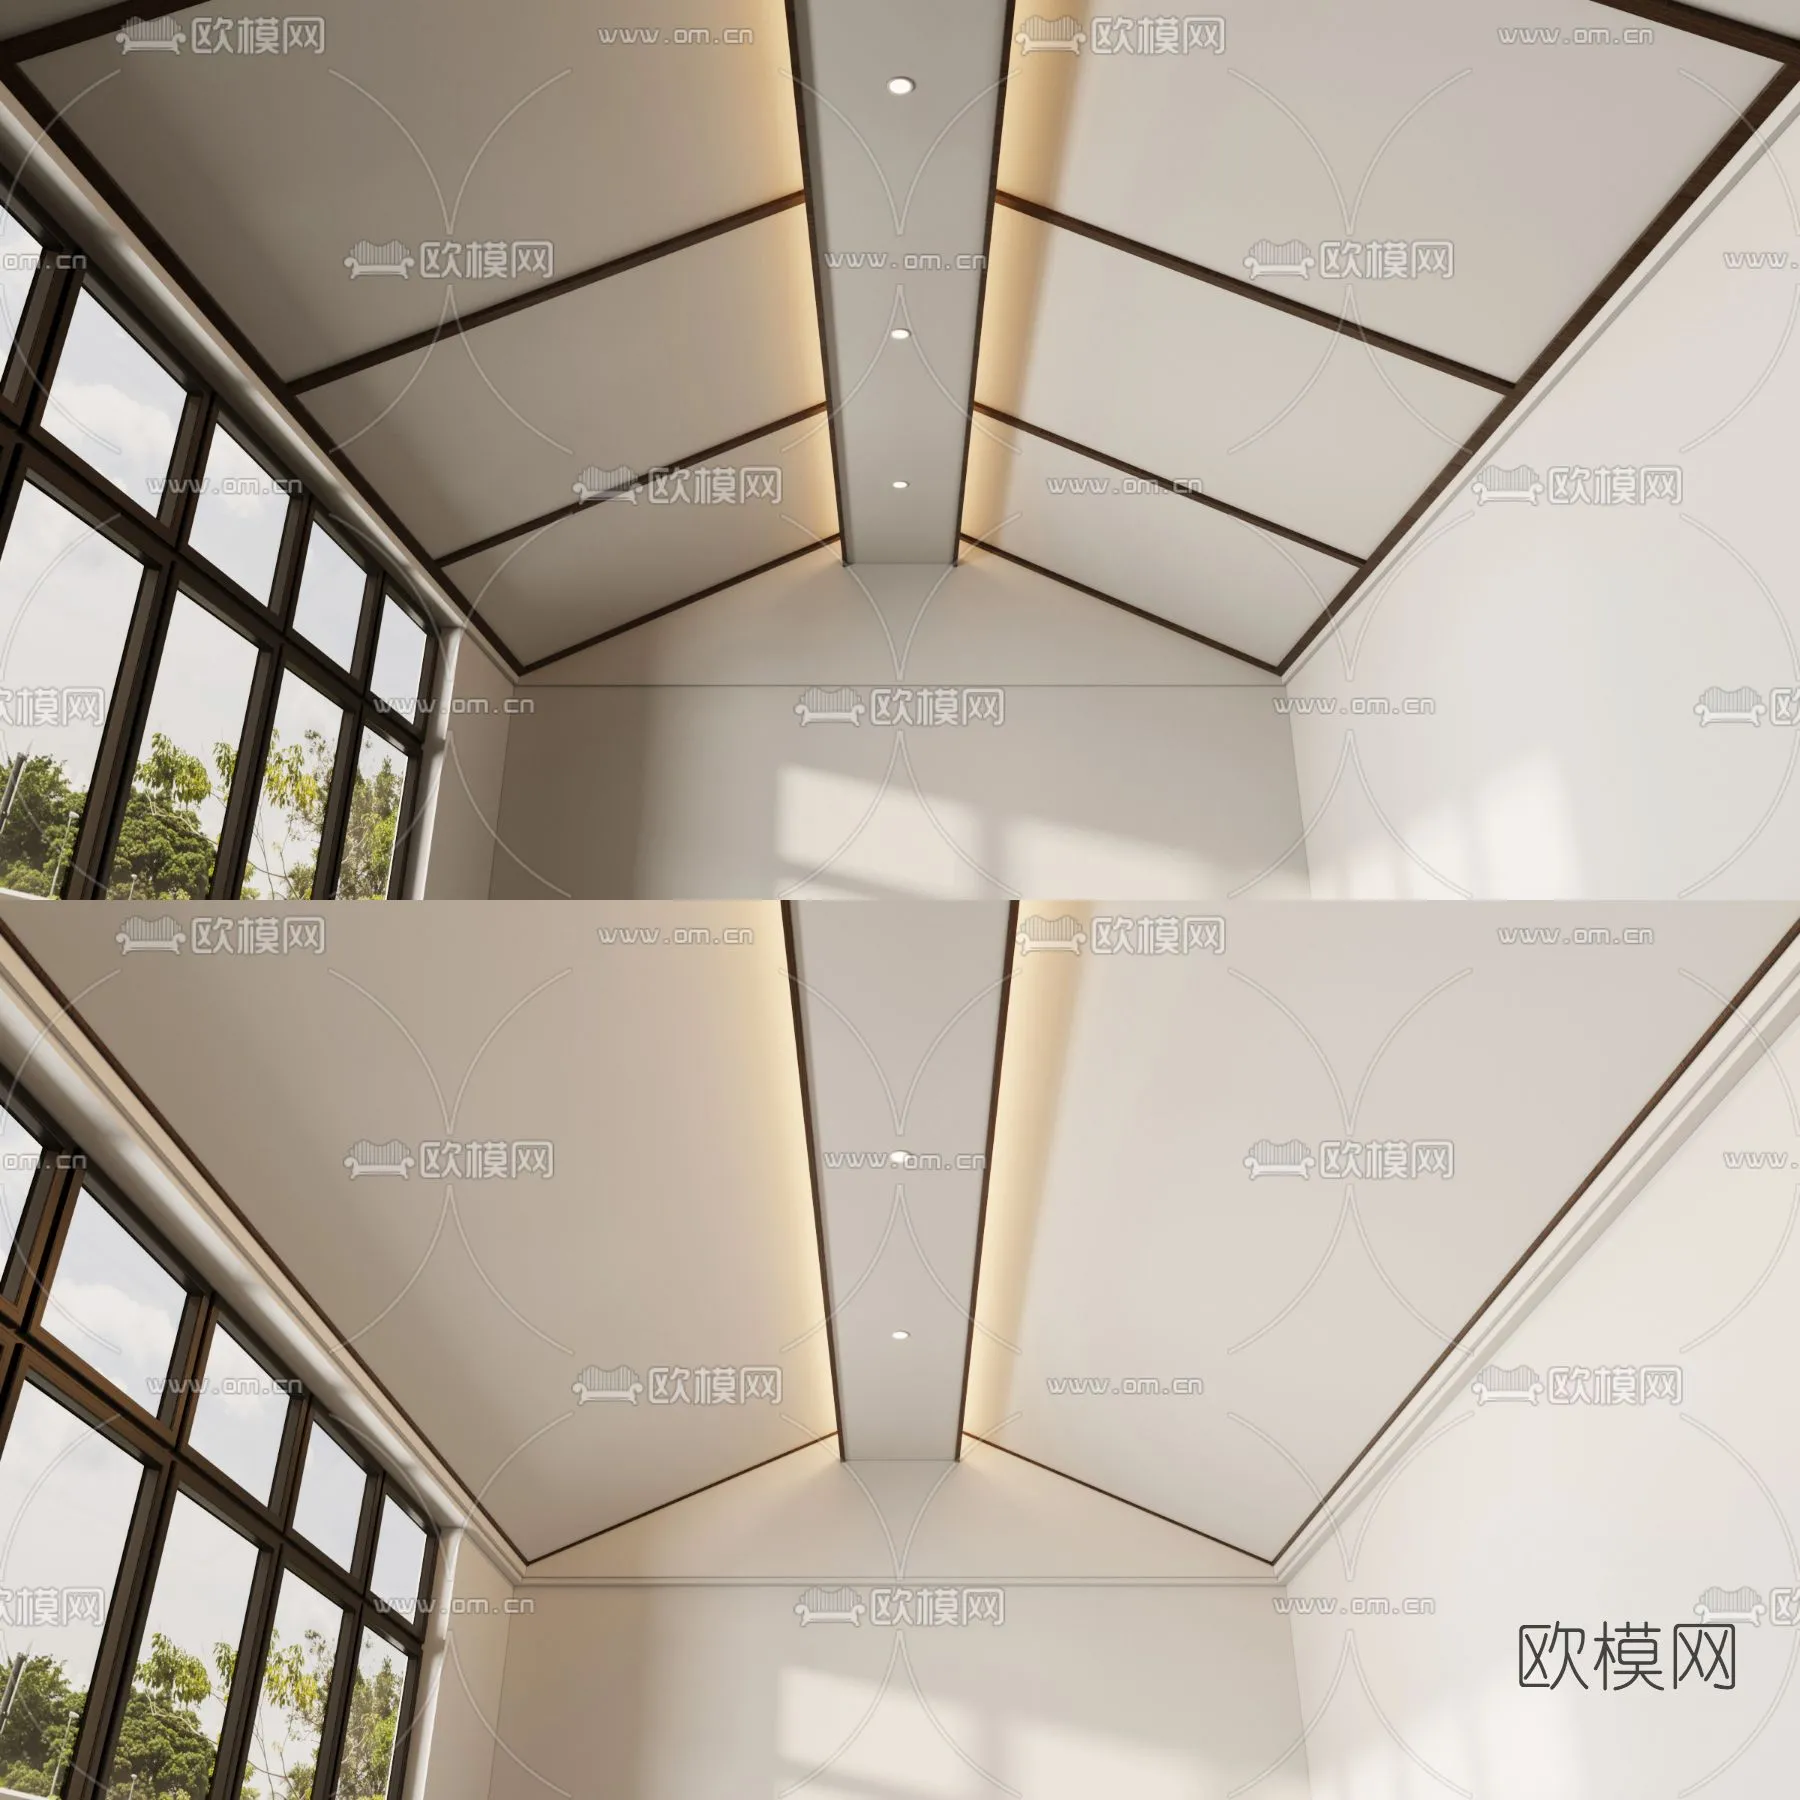 3DS MAX – DETAIL – CEILING – VRAY / CORONA – 3D MODEL – 3142